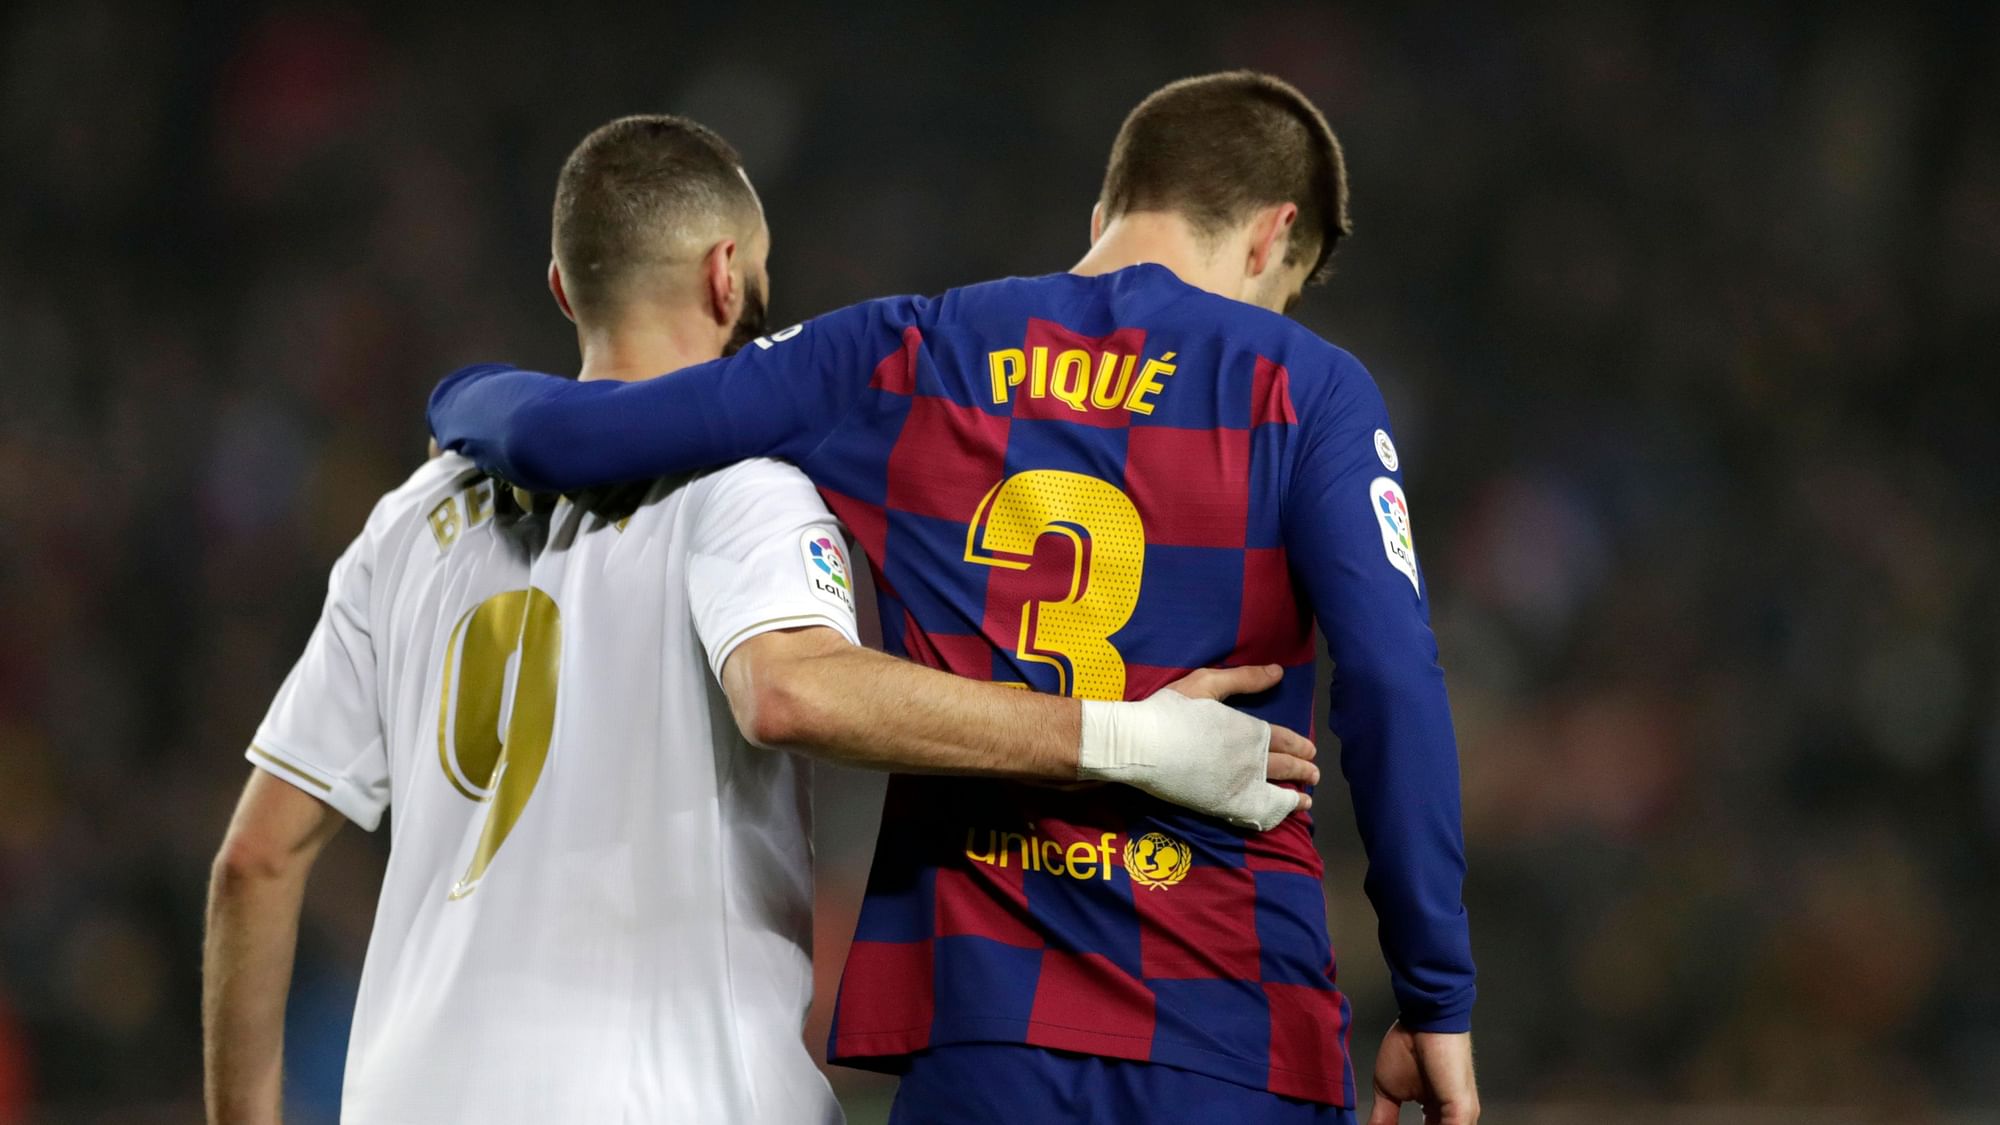 Real Madrid’s Karim Benzema, left, and Barcelona’s Gerard Pique walks together on the pitch during a Spanish La Liga soccer match between Barcelona and Real Madrid at Camp Nou stadium in Barcelona, Spain, Wednesday, Dec. 18, 2019.&nbsp;